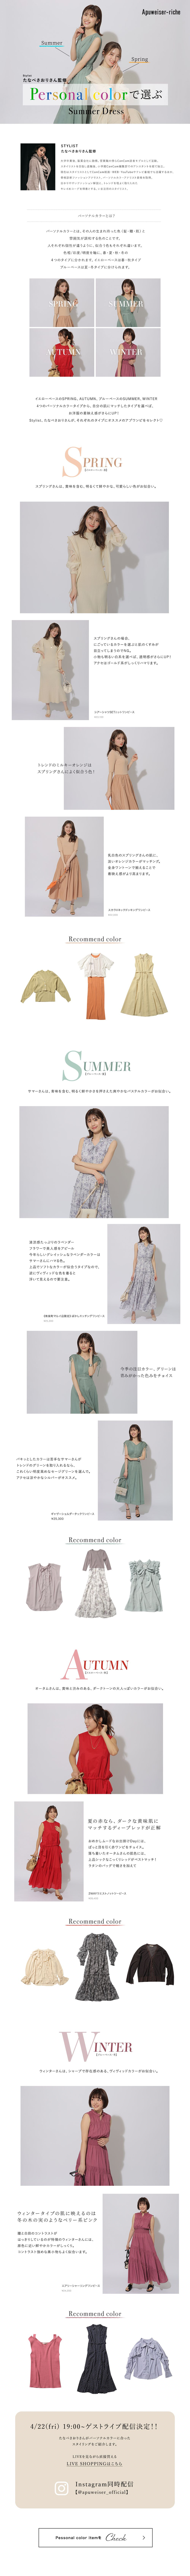 Personal colorで選ぶSummer Dress